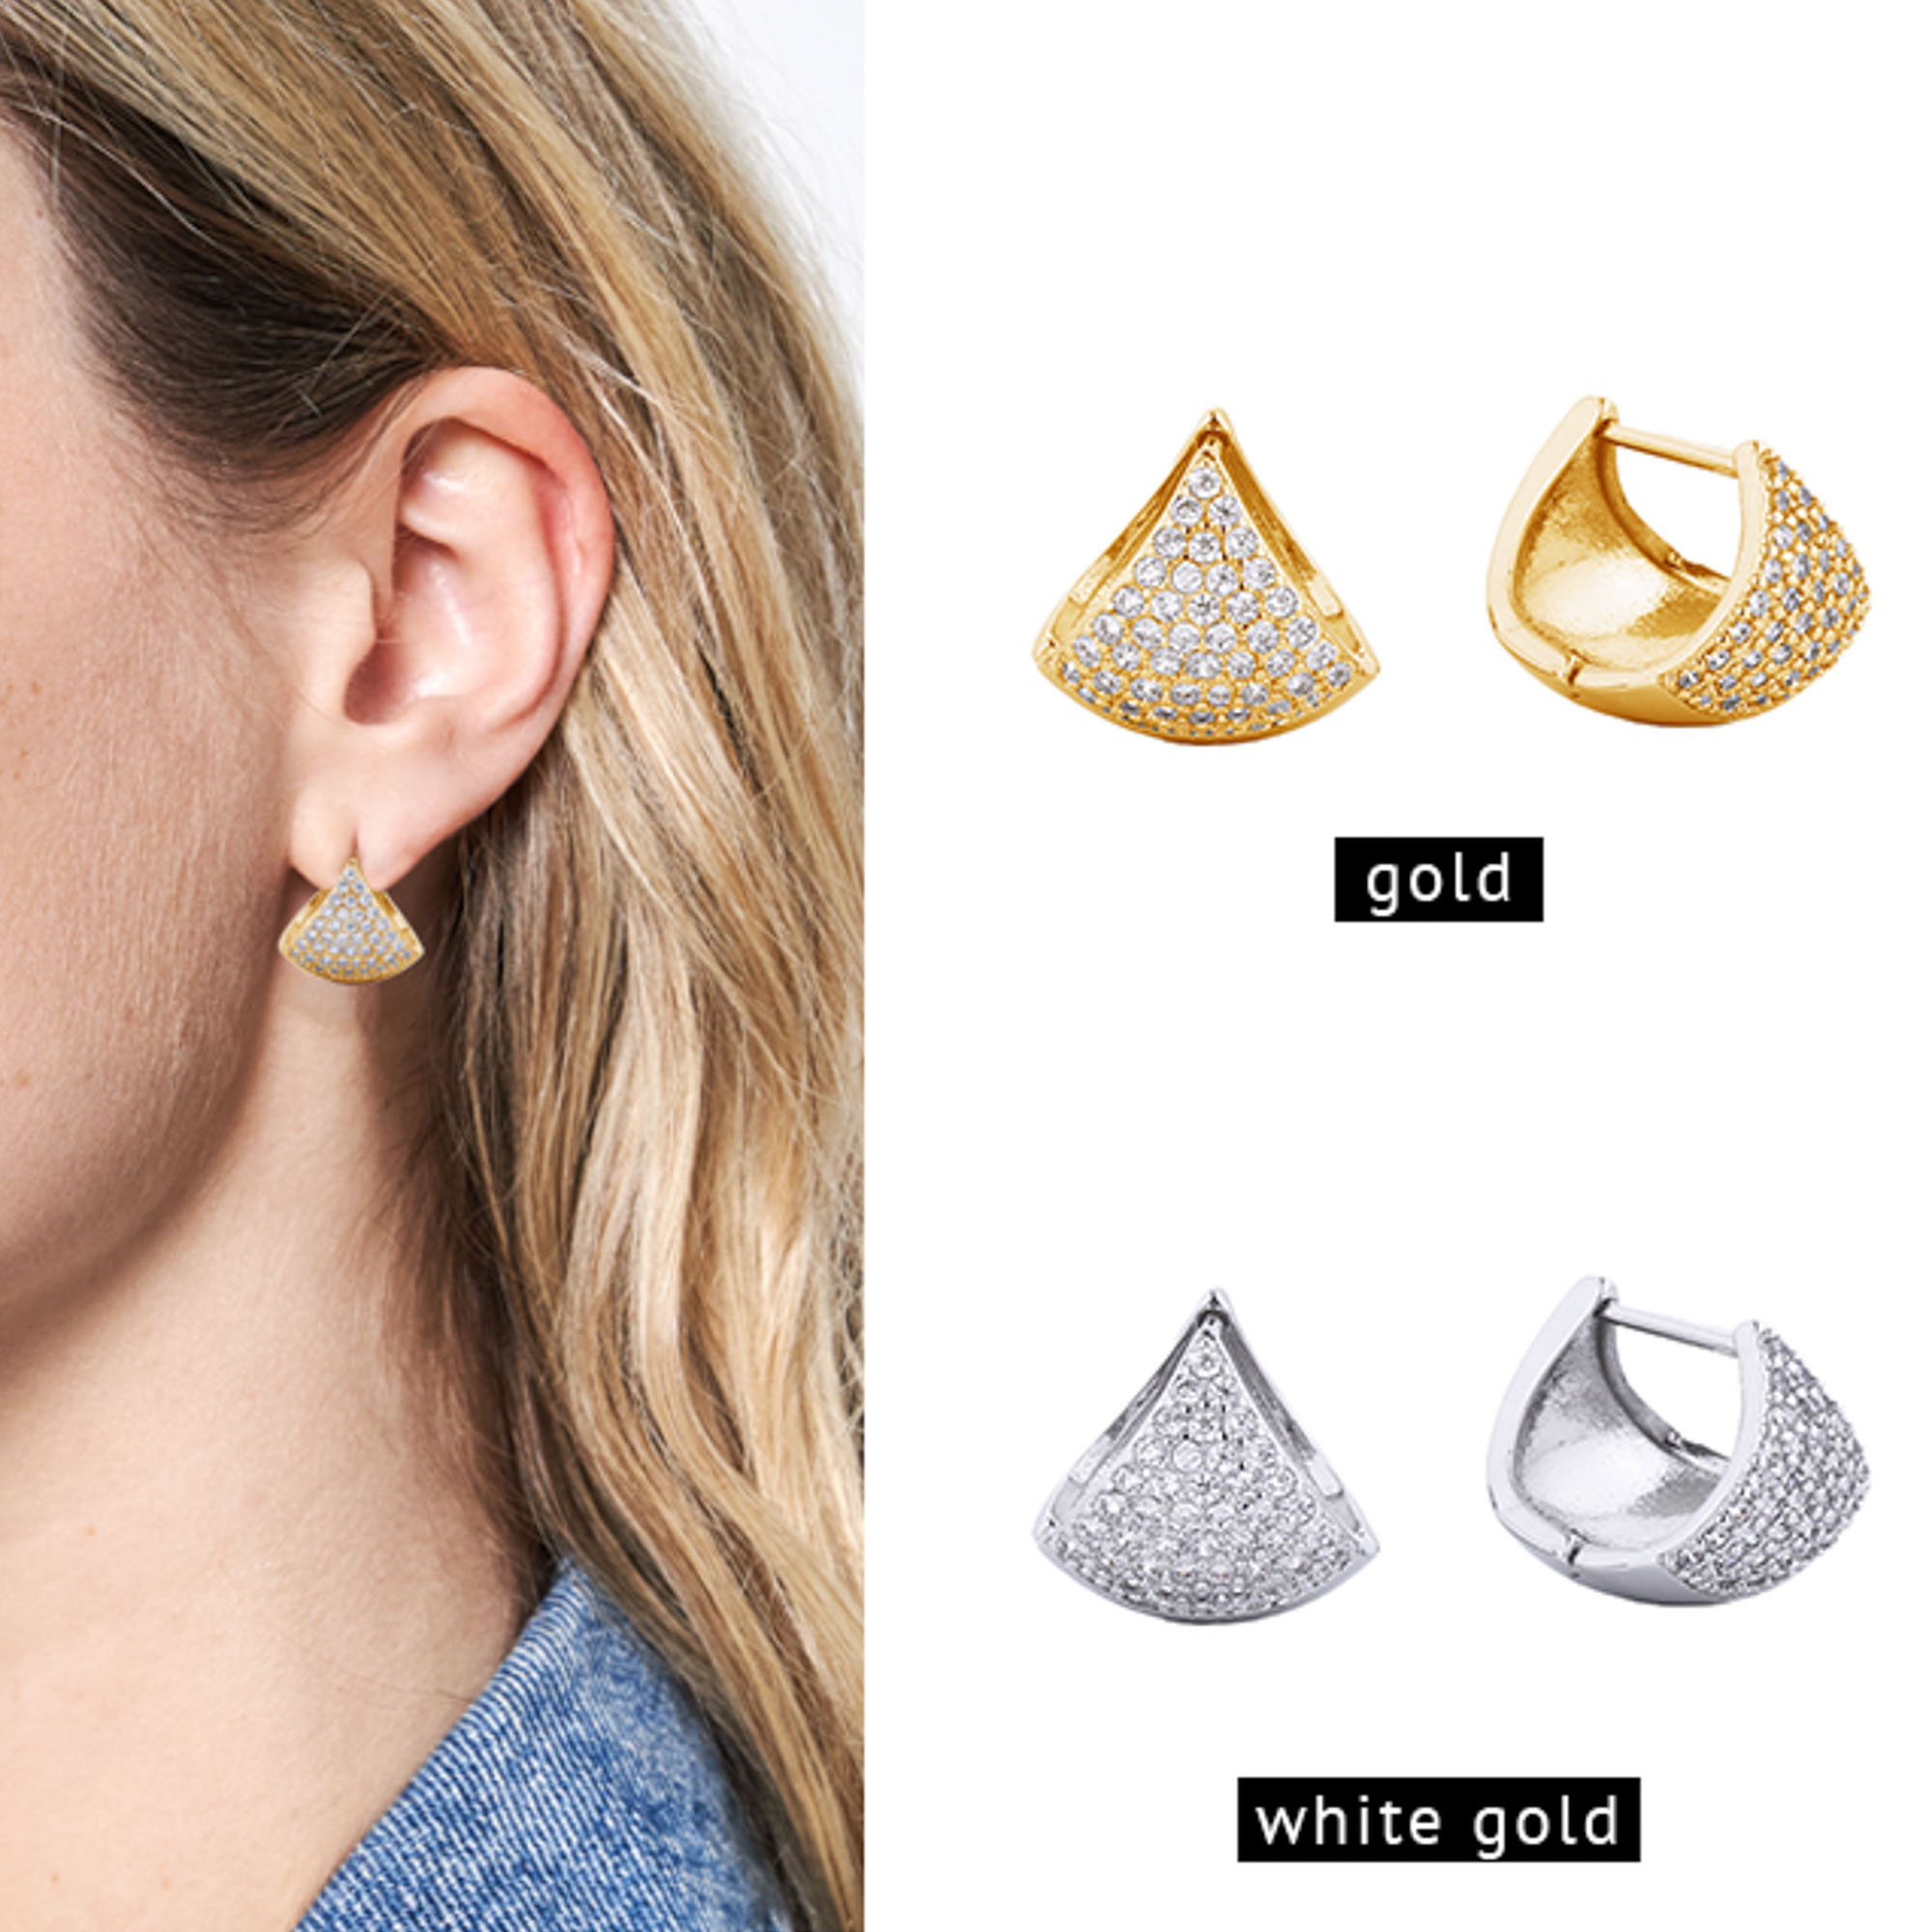 14K GOLD/WHITE GOLD DIPPED HUGGIE EARRING CZ PAVED